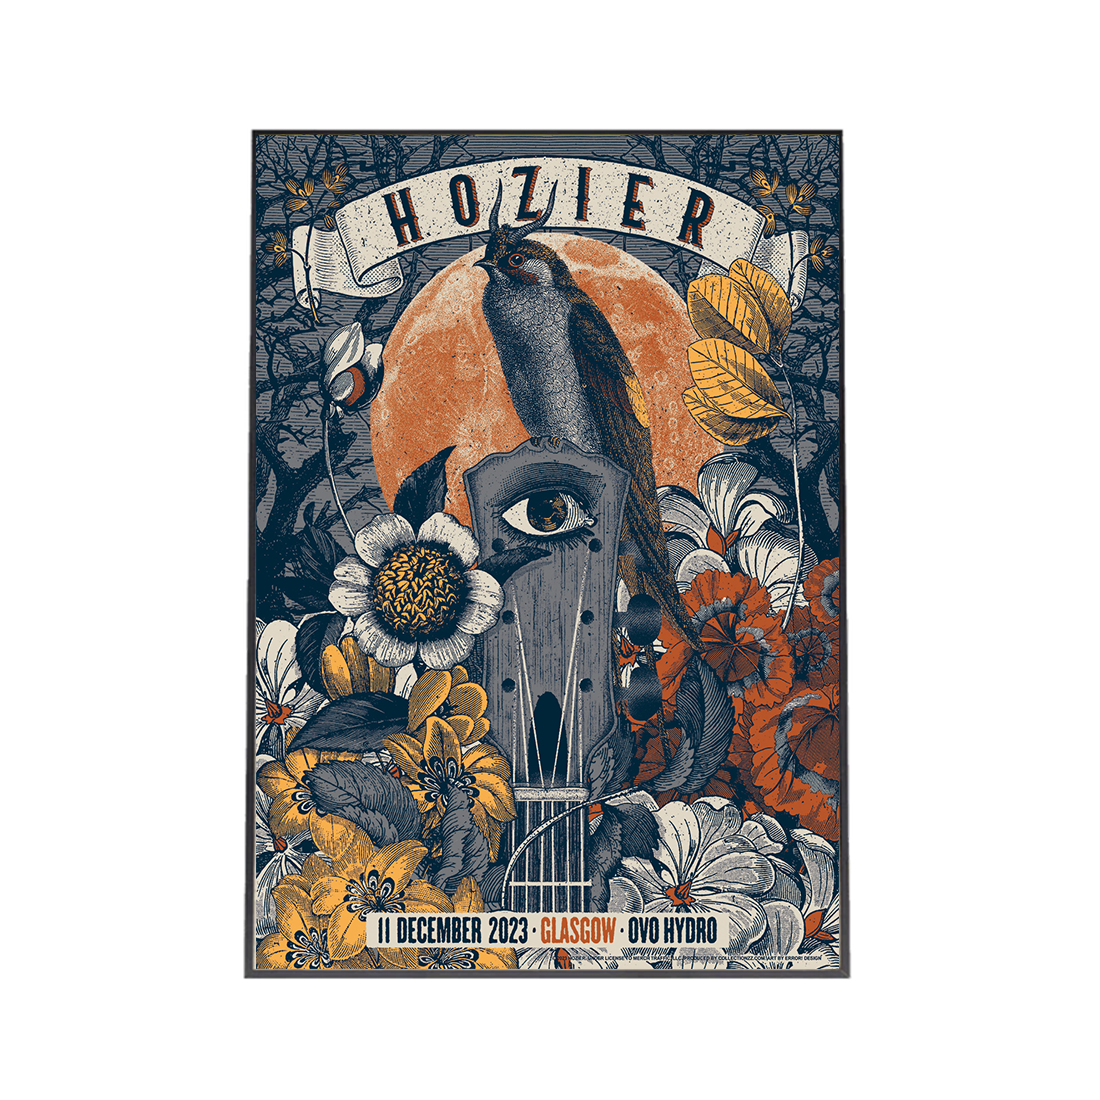 Hozier - Glasgow Event Poster